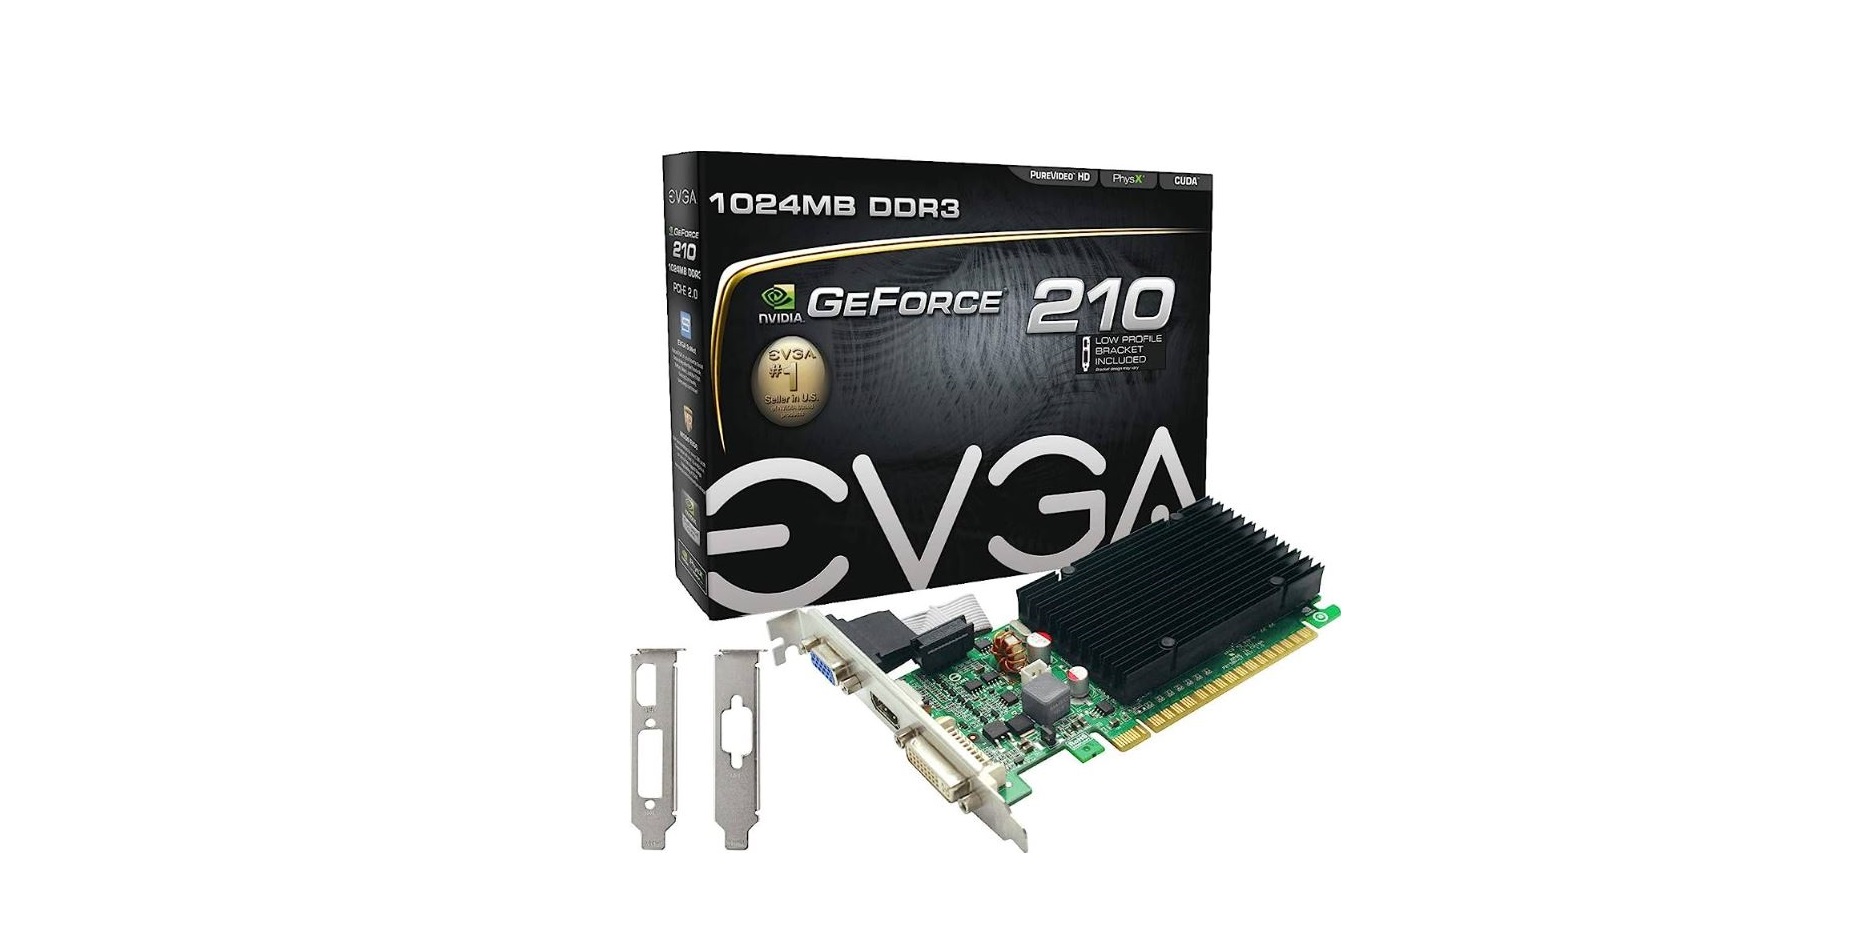 MSI Geforce 210 1024 MB DDR3 PCI-Express 2.0 Graphics Card FEATURE